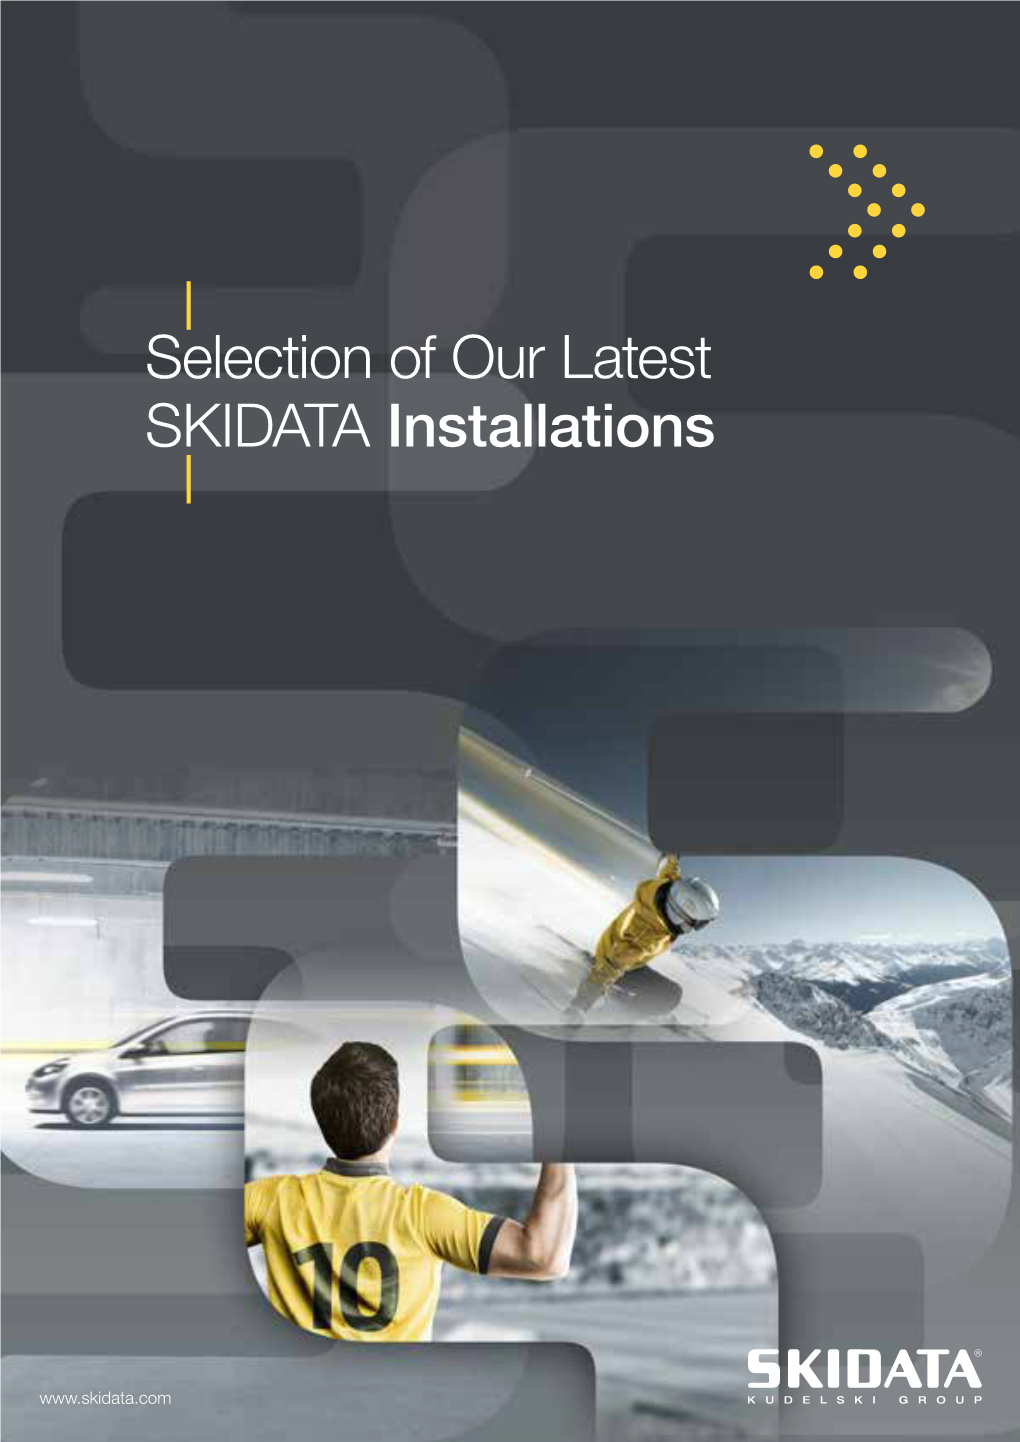 Selection of Our Latest SKIDATA Installations